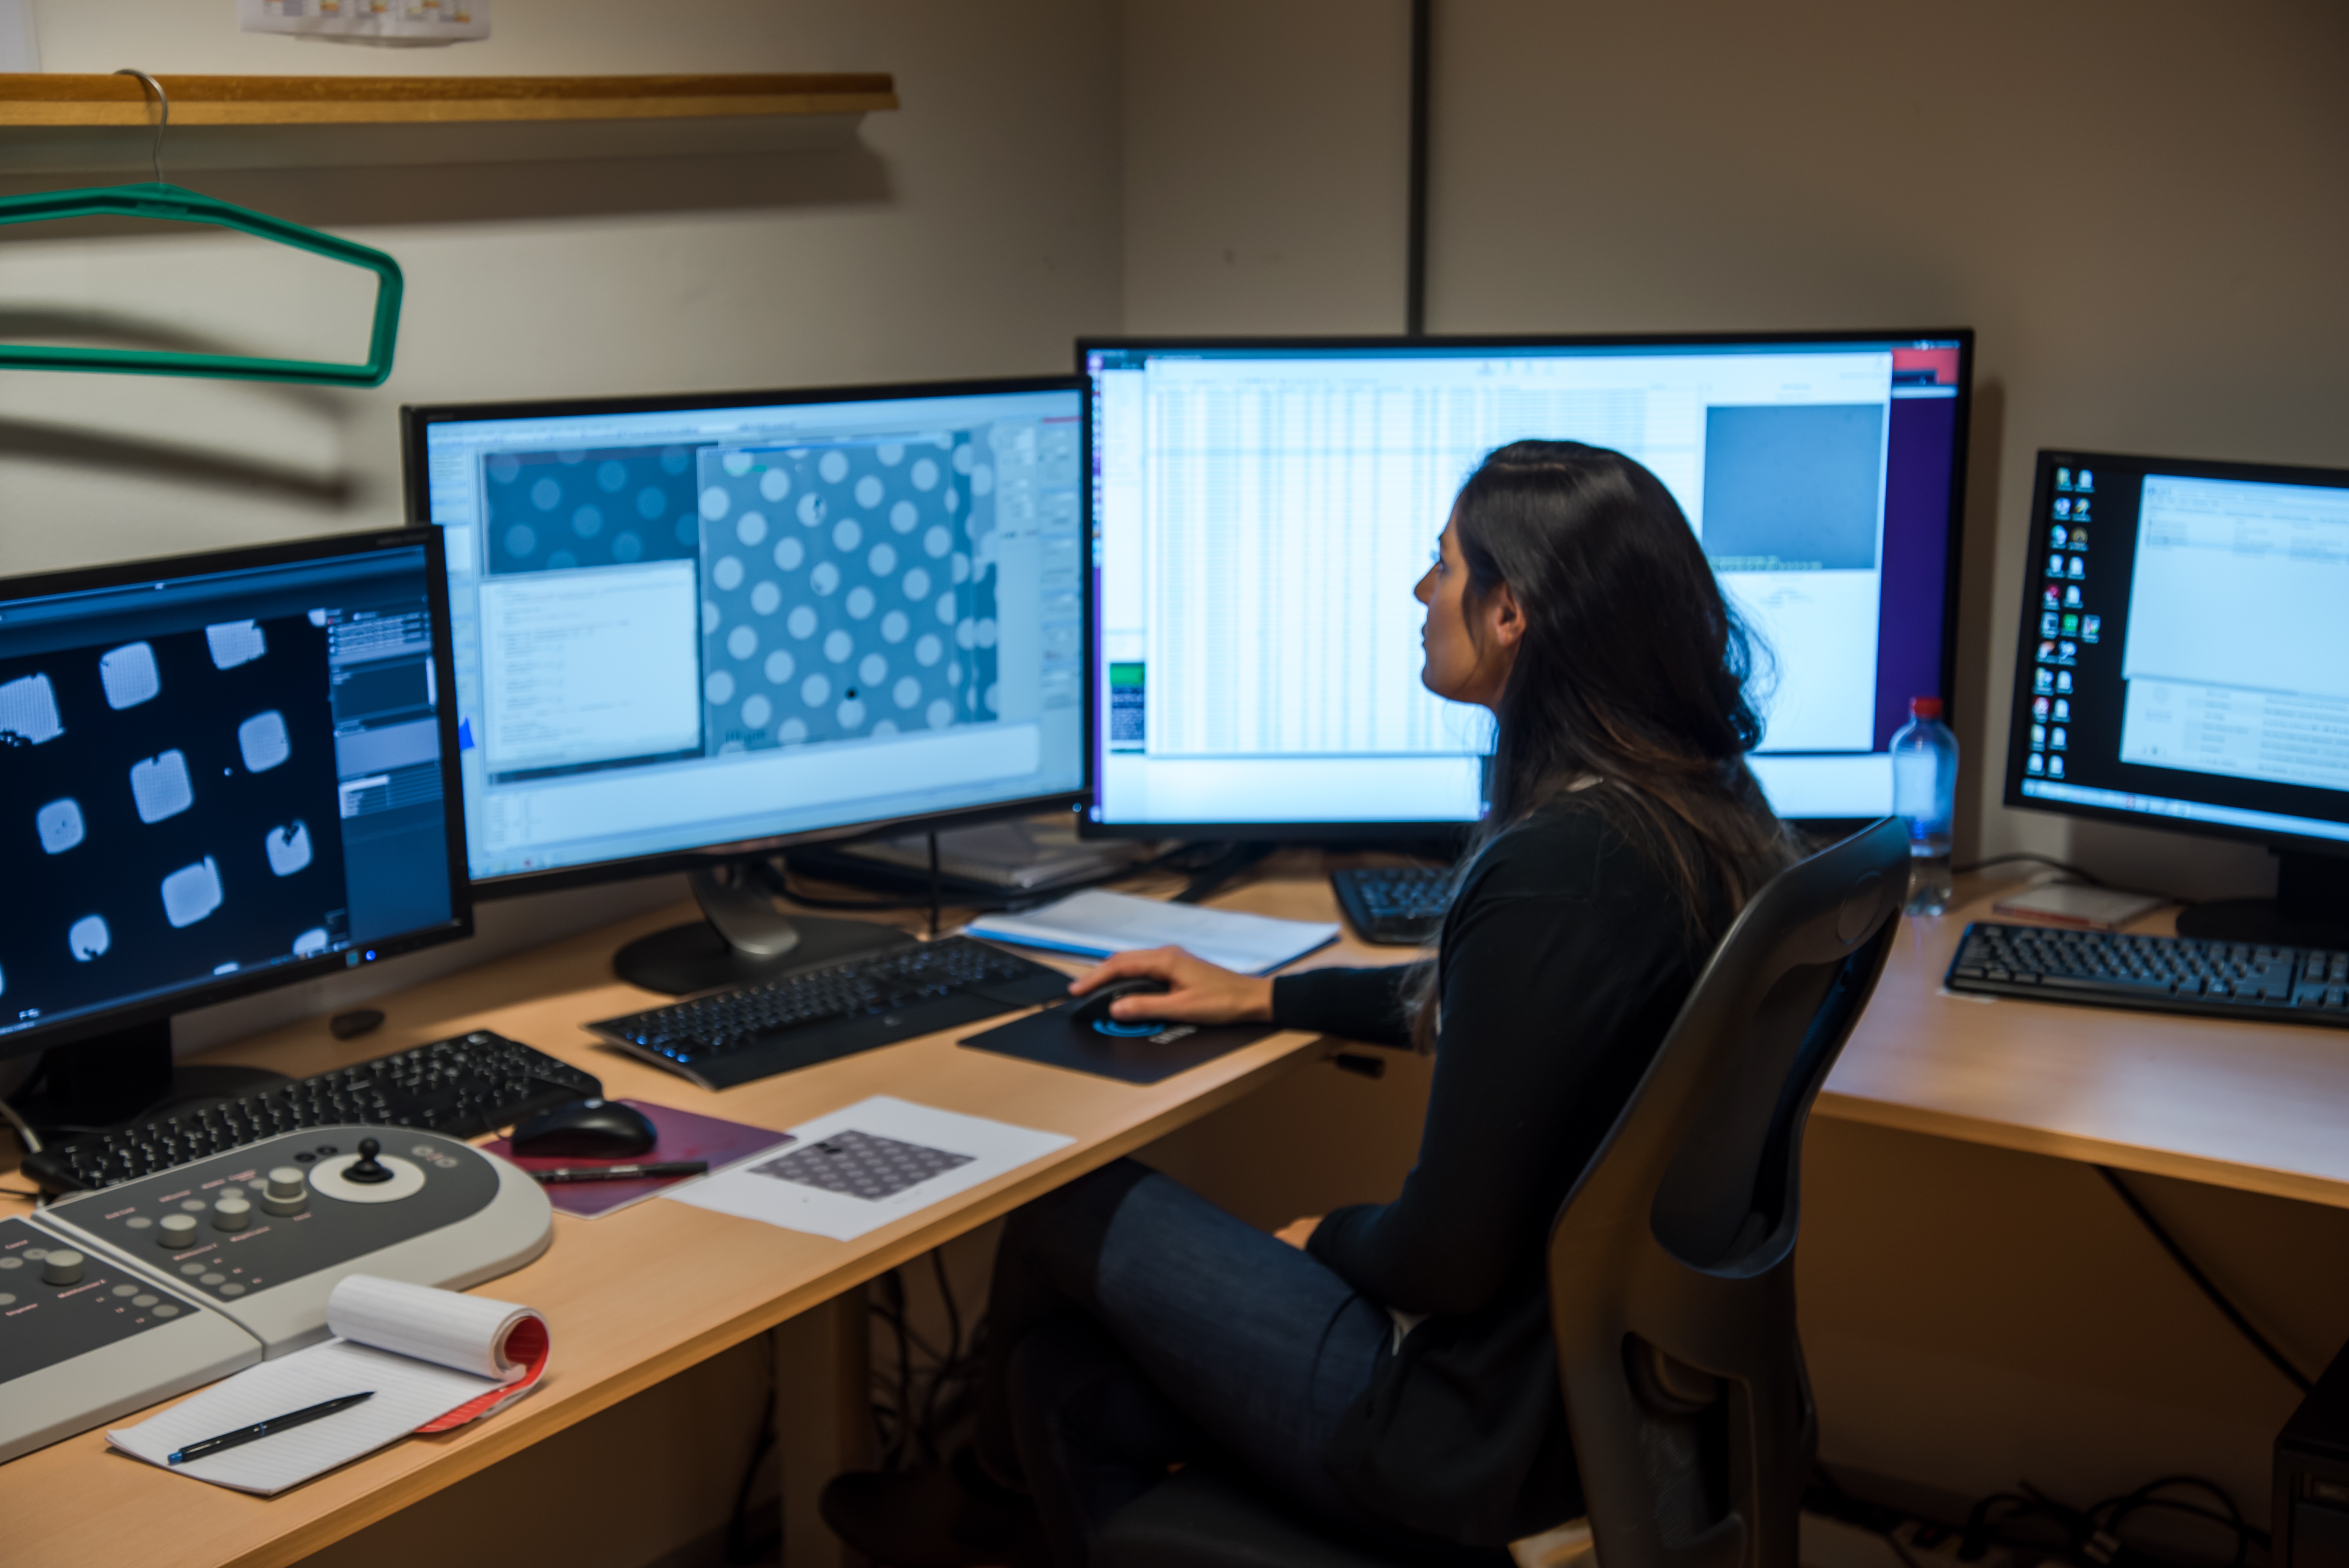 Cristina Paulino in action, operating and acquiring data at the in-house high-end cryo-electron microscope Talos Arctica she supervises and manages. 